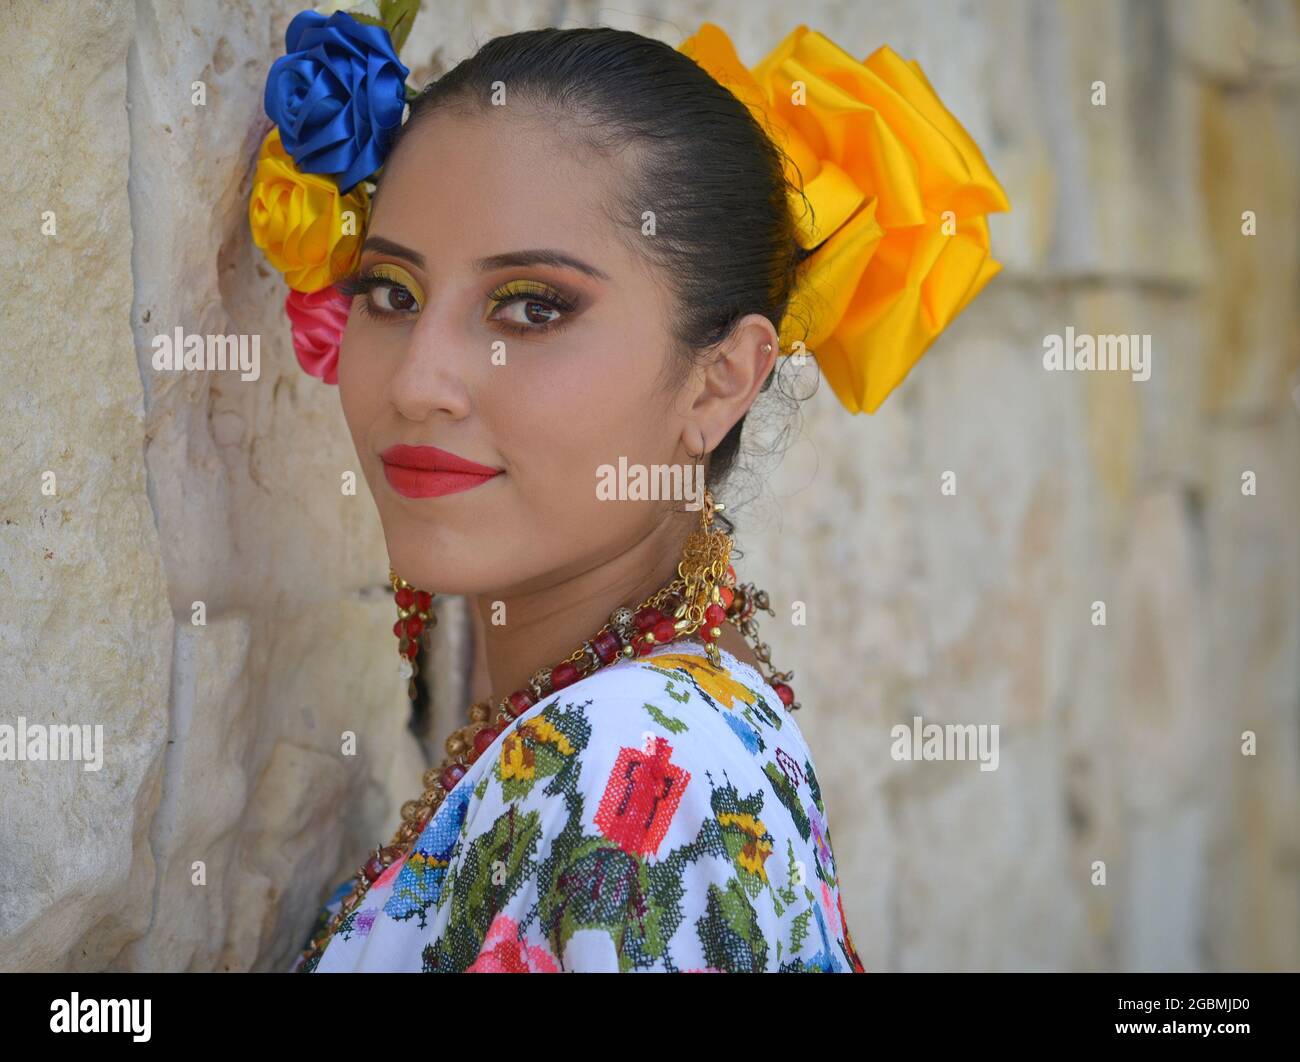 Young beautiful Mexican Yucatecan folk dancer wears traditional folkloric dress with colorful flowers in her hair and looks over her shoulder. Stock Photo